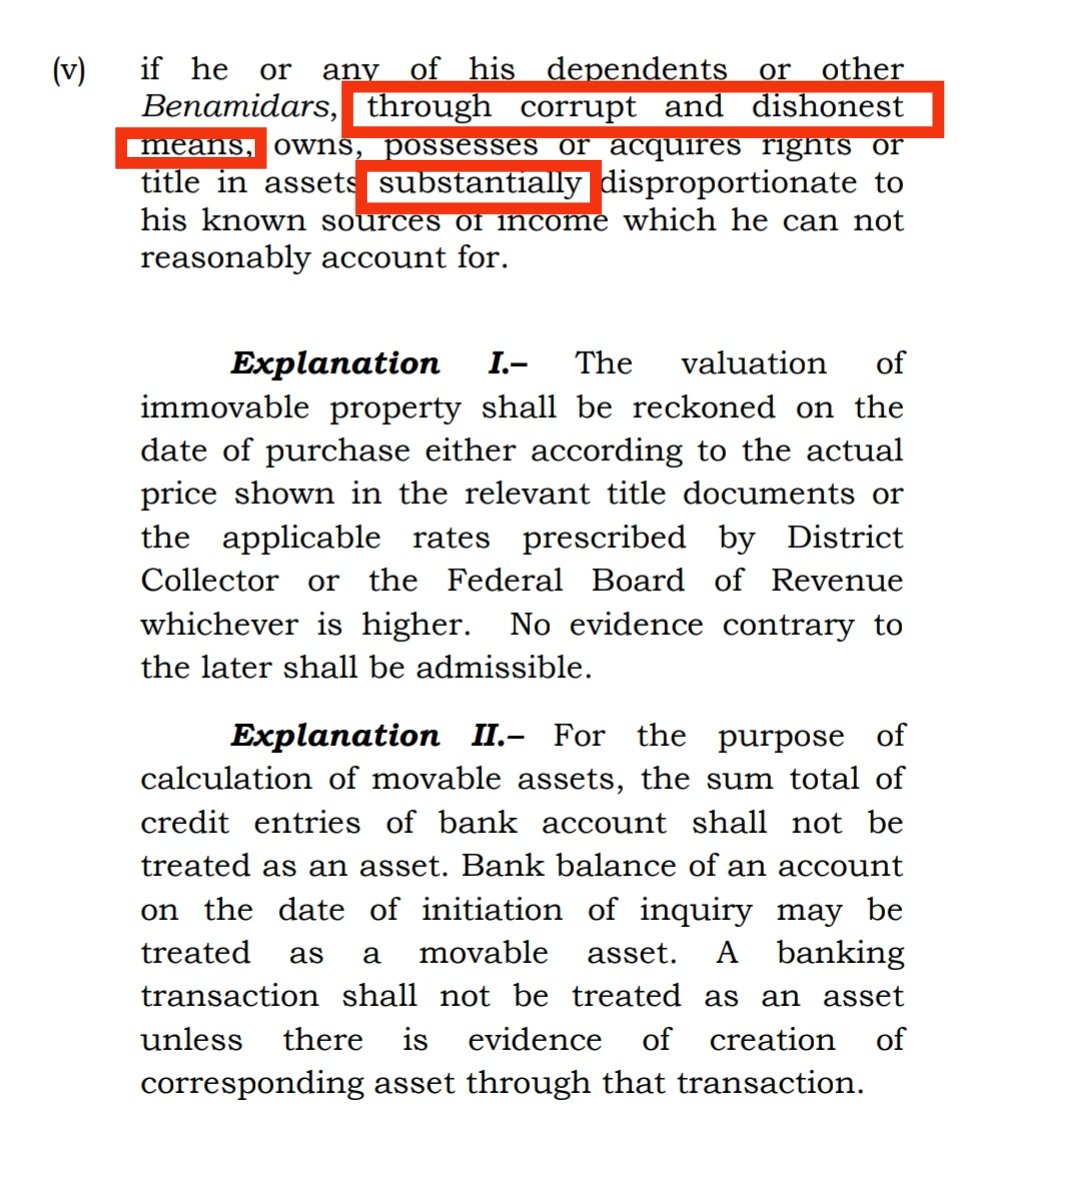 Now in this amendment the article has been ammended and "through corrupt and dishonest practices" has been added. This means that now besides proving assets beyond means, prosecution will also be required to prove corrupt practices.